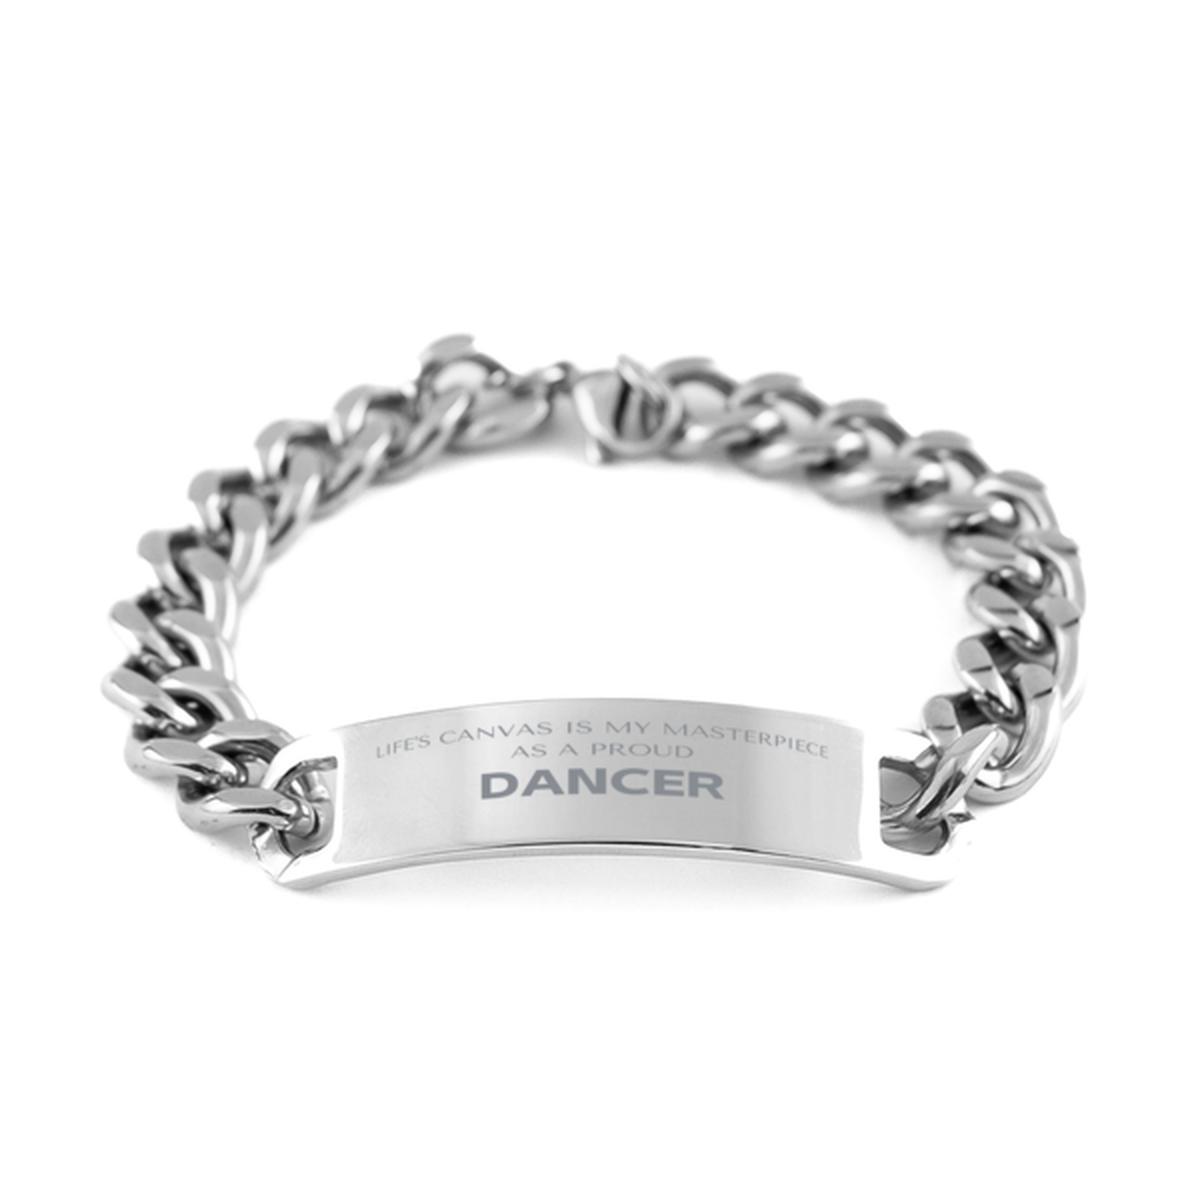 Proud Dancer Gifts, Life's canvas is my masterpiece, Epic Birthday Christmas Unique Cuban Chain Stainless Steel Bracelet For Dancer, Coworkers, Men, Women, Friends